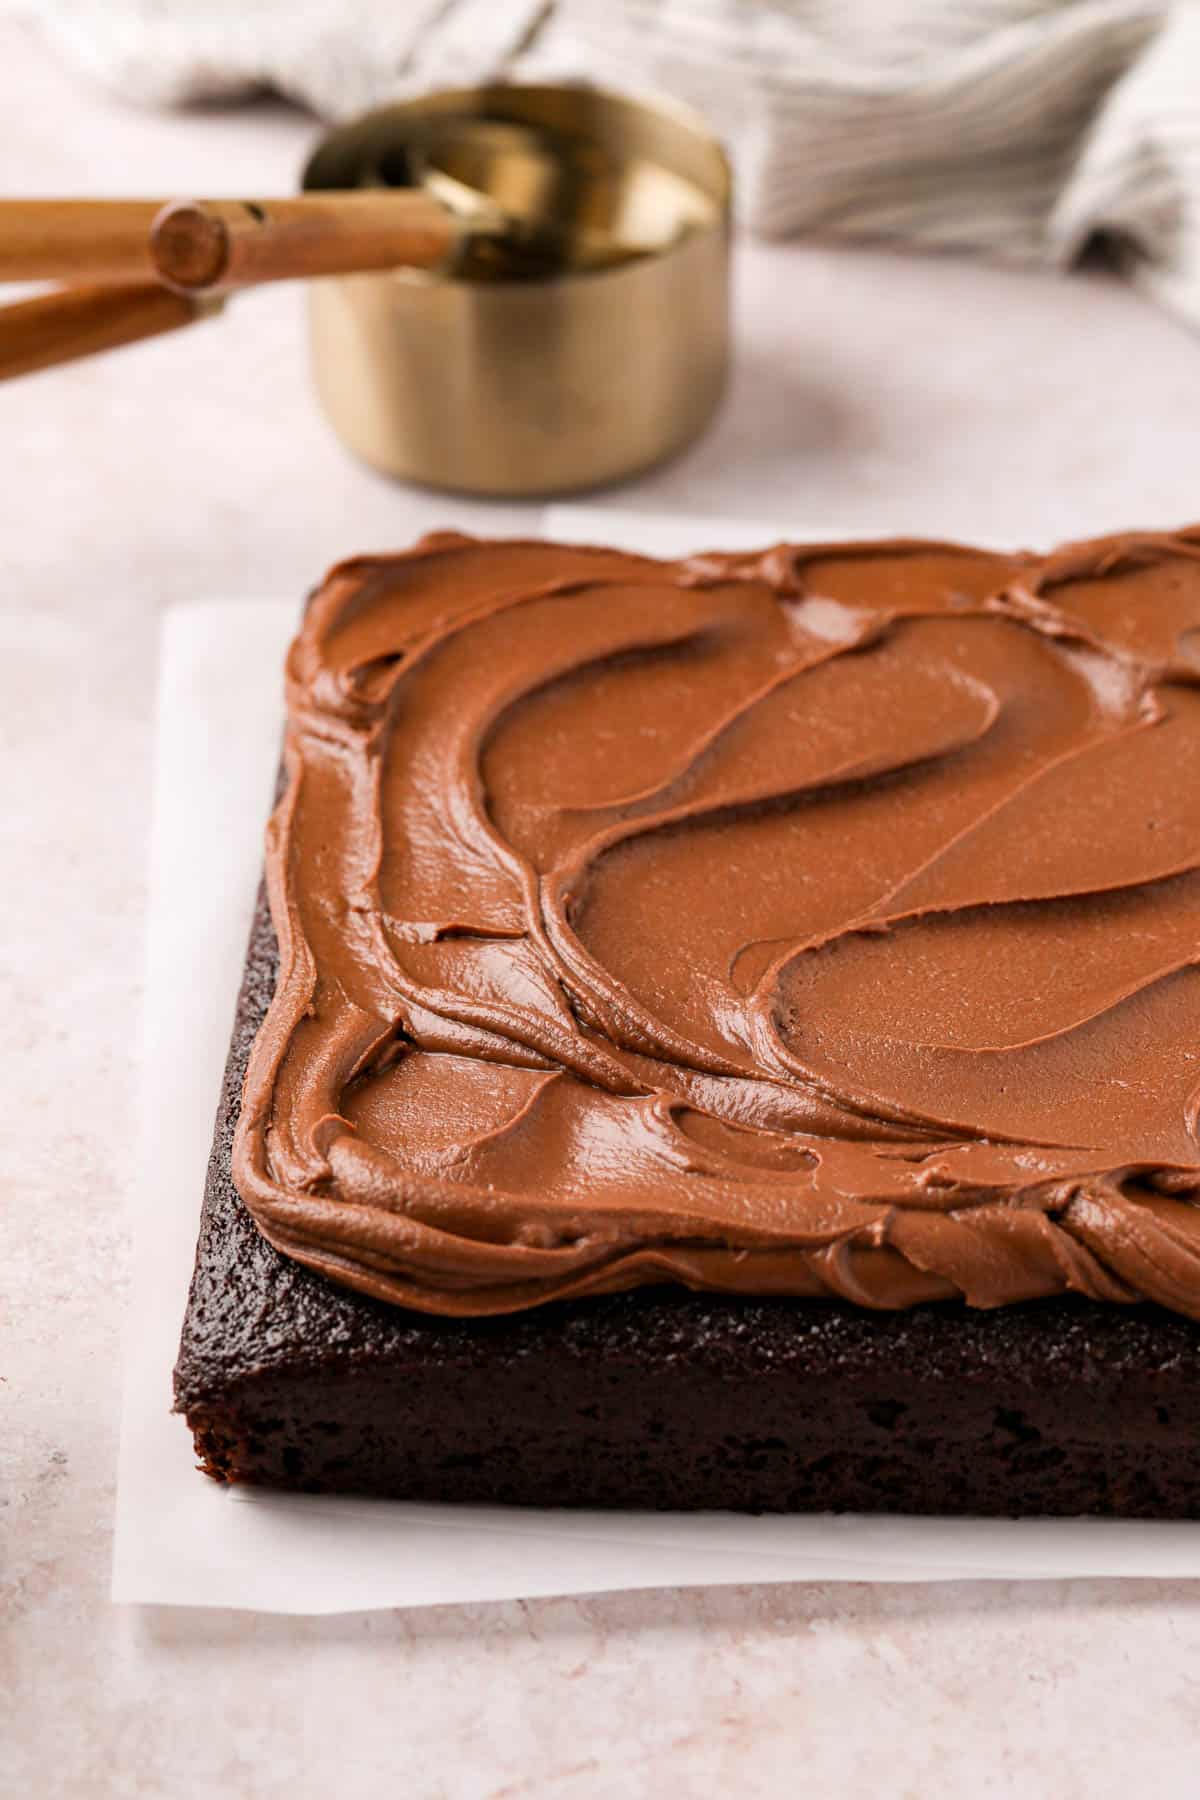 Square chocolate cake topped with silky chocolate fudge frosting.